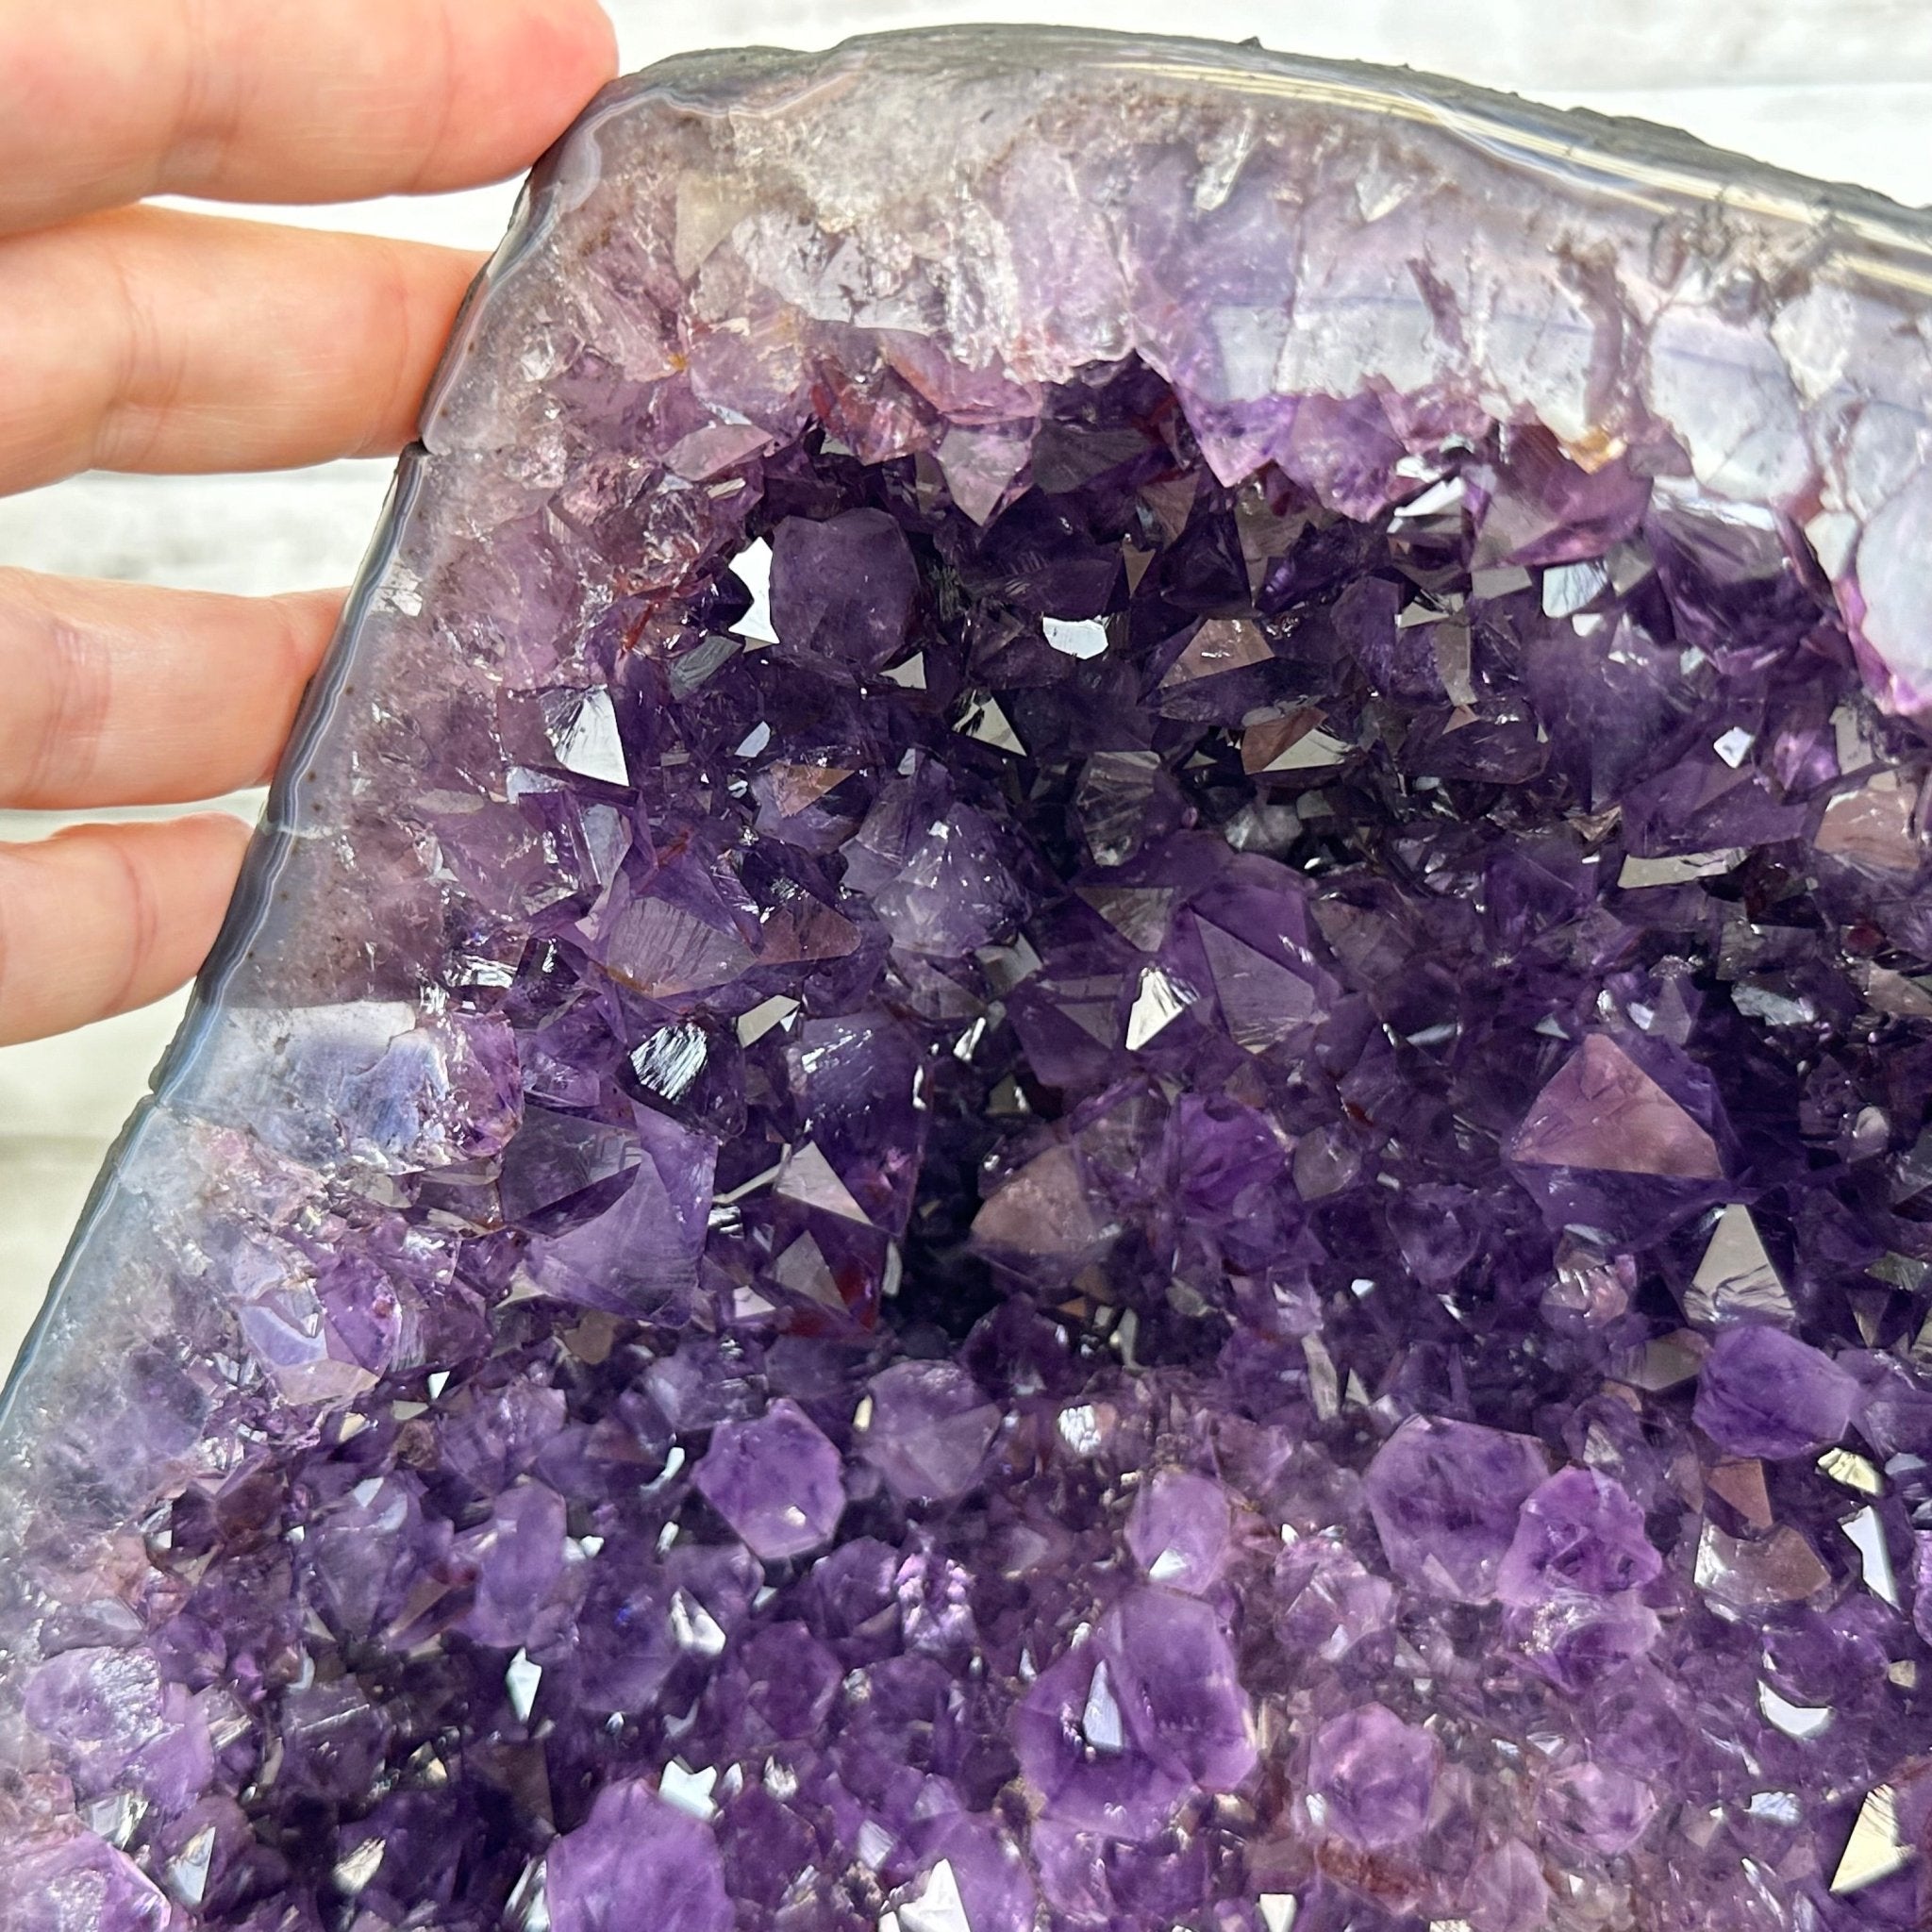 Quality Brazilian Amethyst Cathedral, 30.6 lbs & 12.9" Tall, #5601 - 1406 - Brazil GemsBrazil GemsQuality Brazilian Amethyst Cathedral, 30.6 lbs & 12.9" Tall, #5601 - 1406Cathedrals5601 - 1406